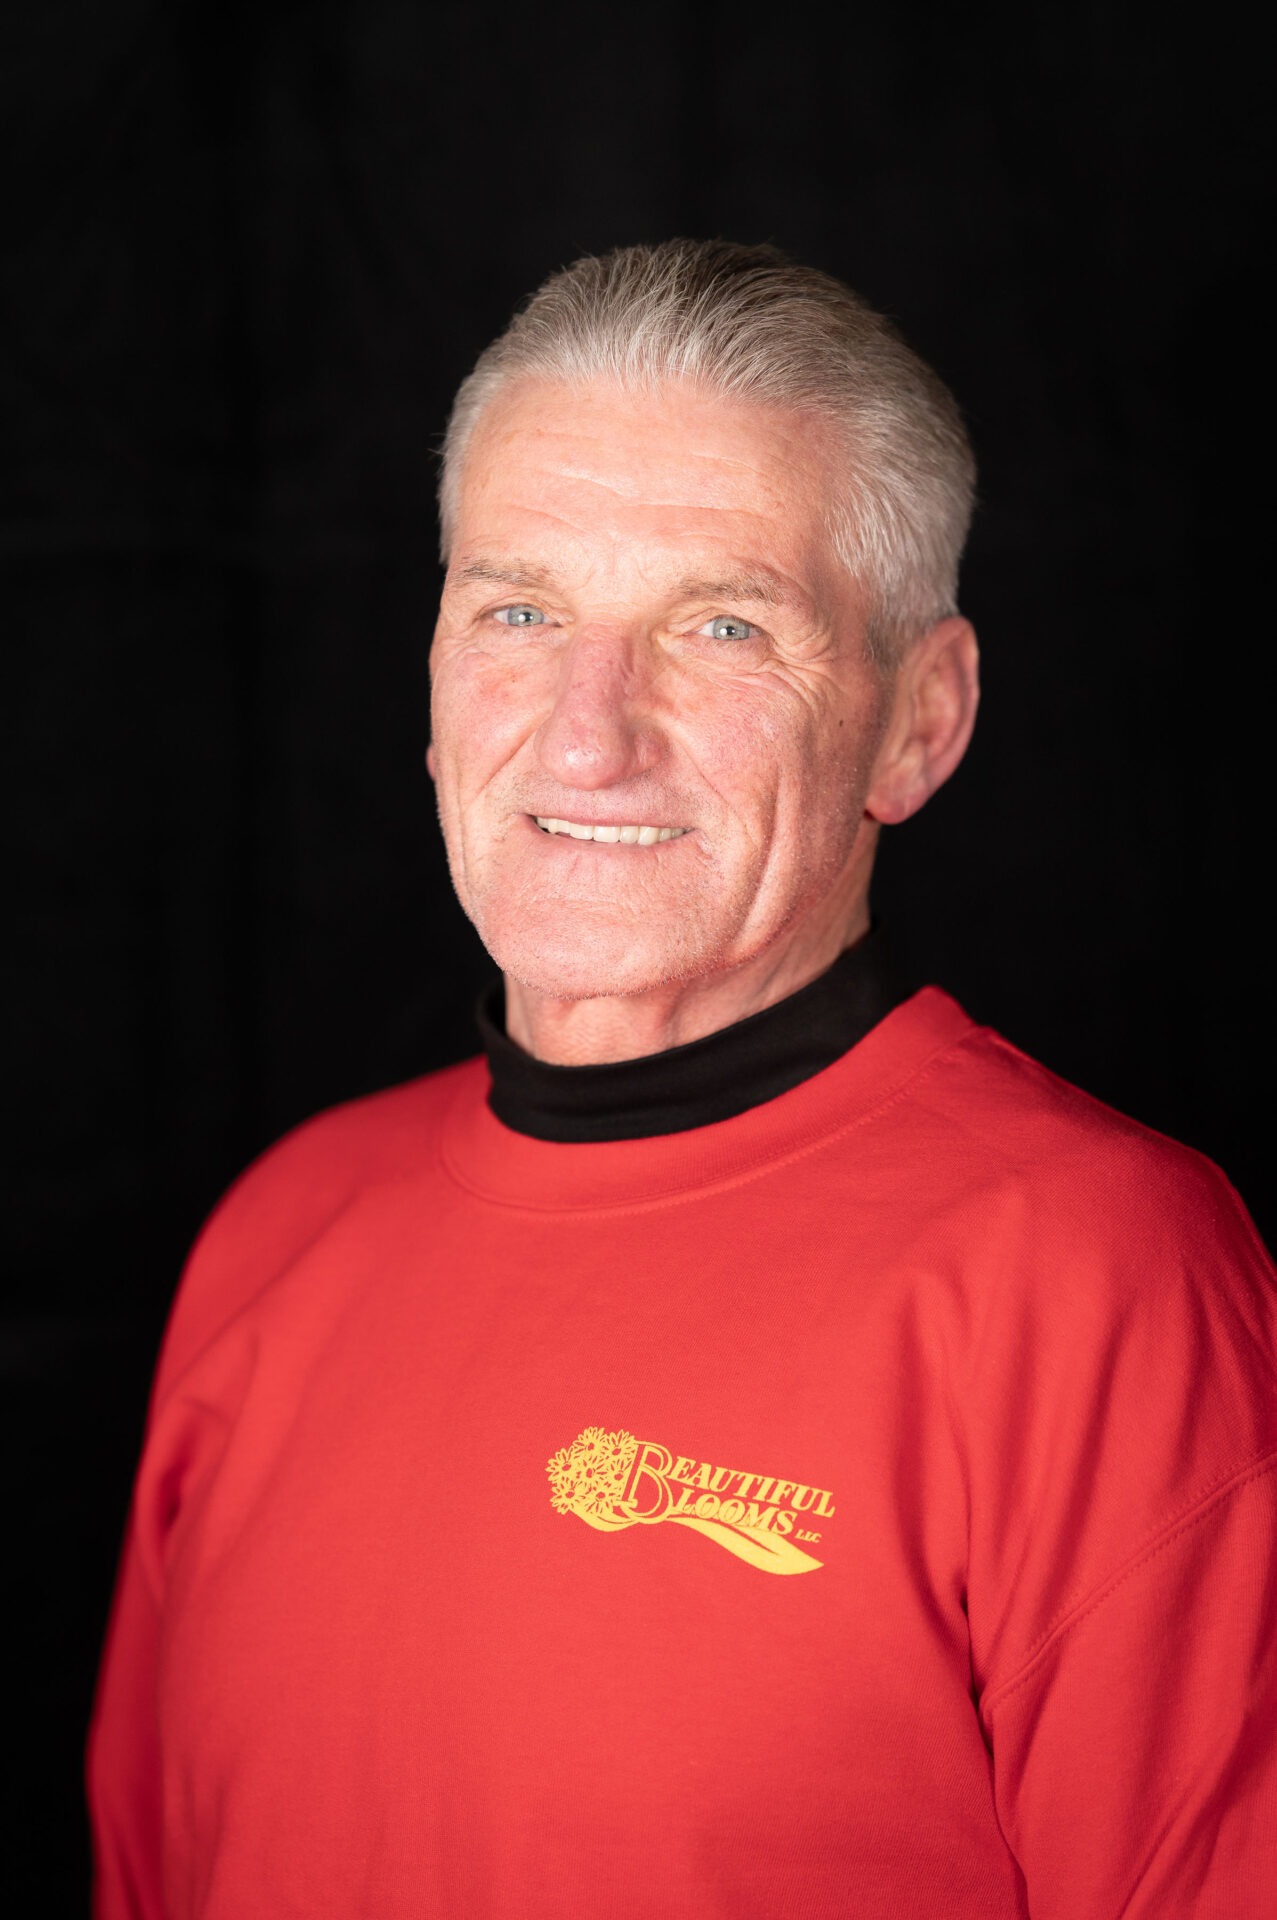 A smiling person with silver hair wearing a red turtleneck with a "Beautiful Blooms LLC" logo. The background is dark and unadorned.